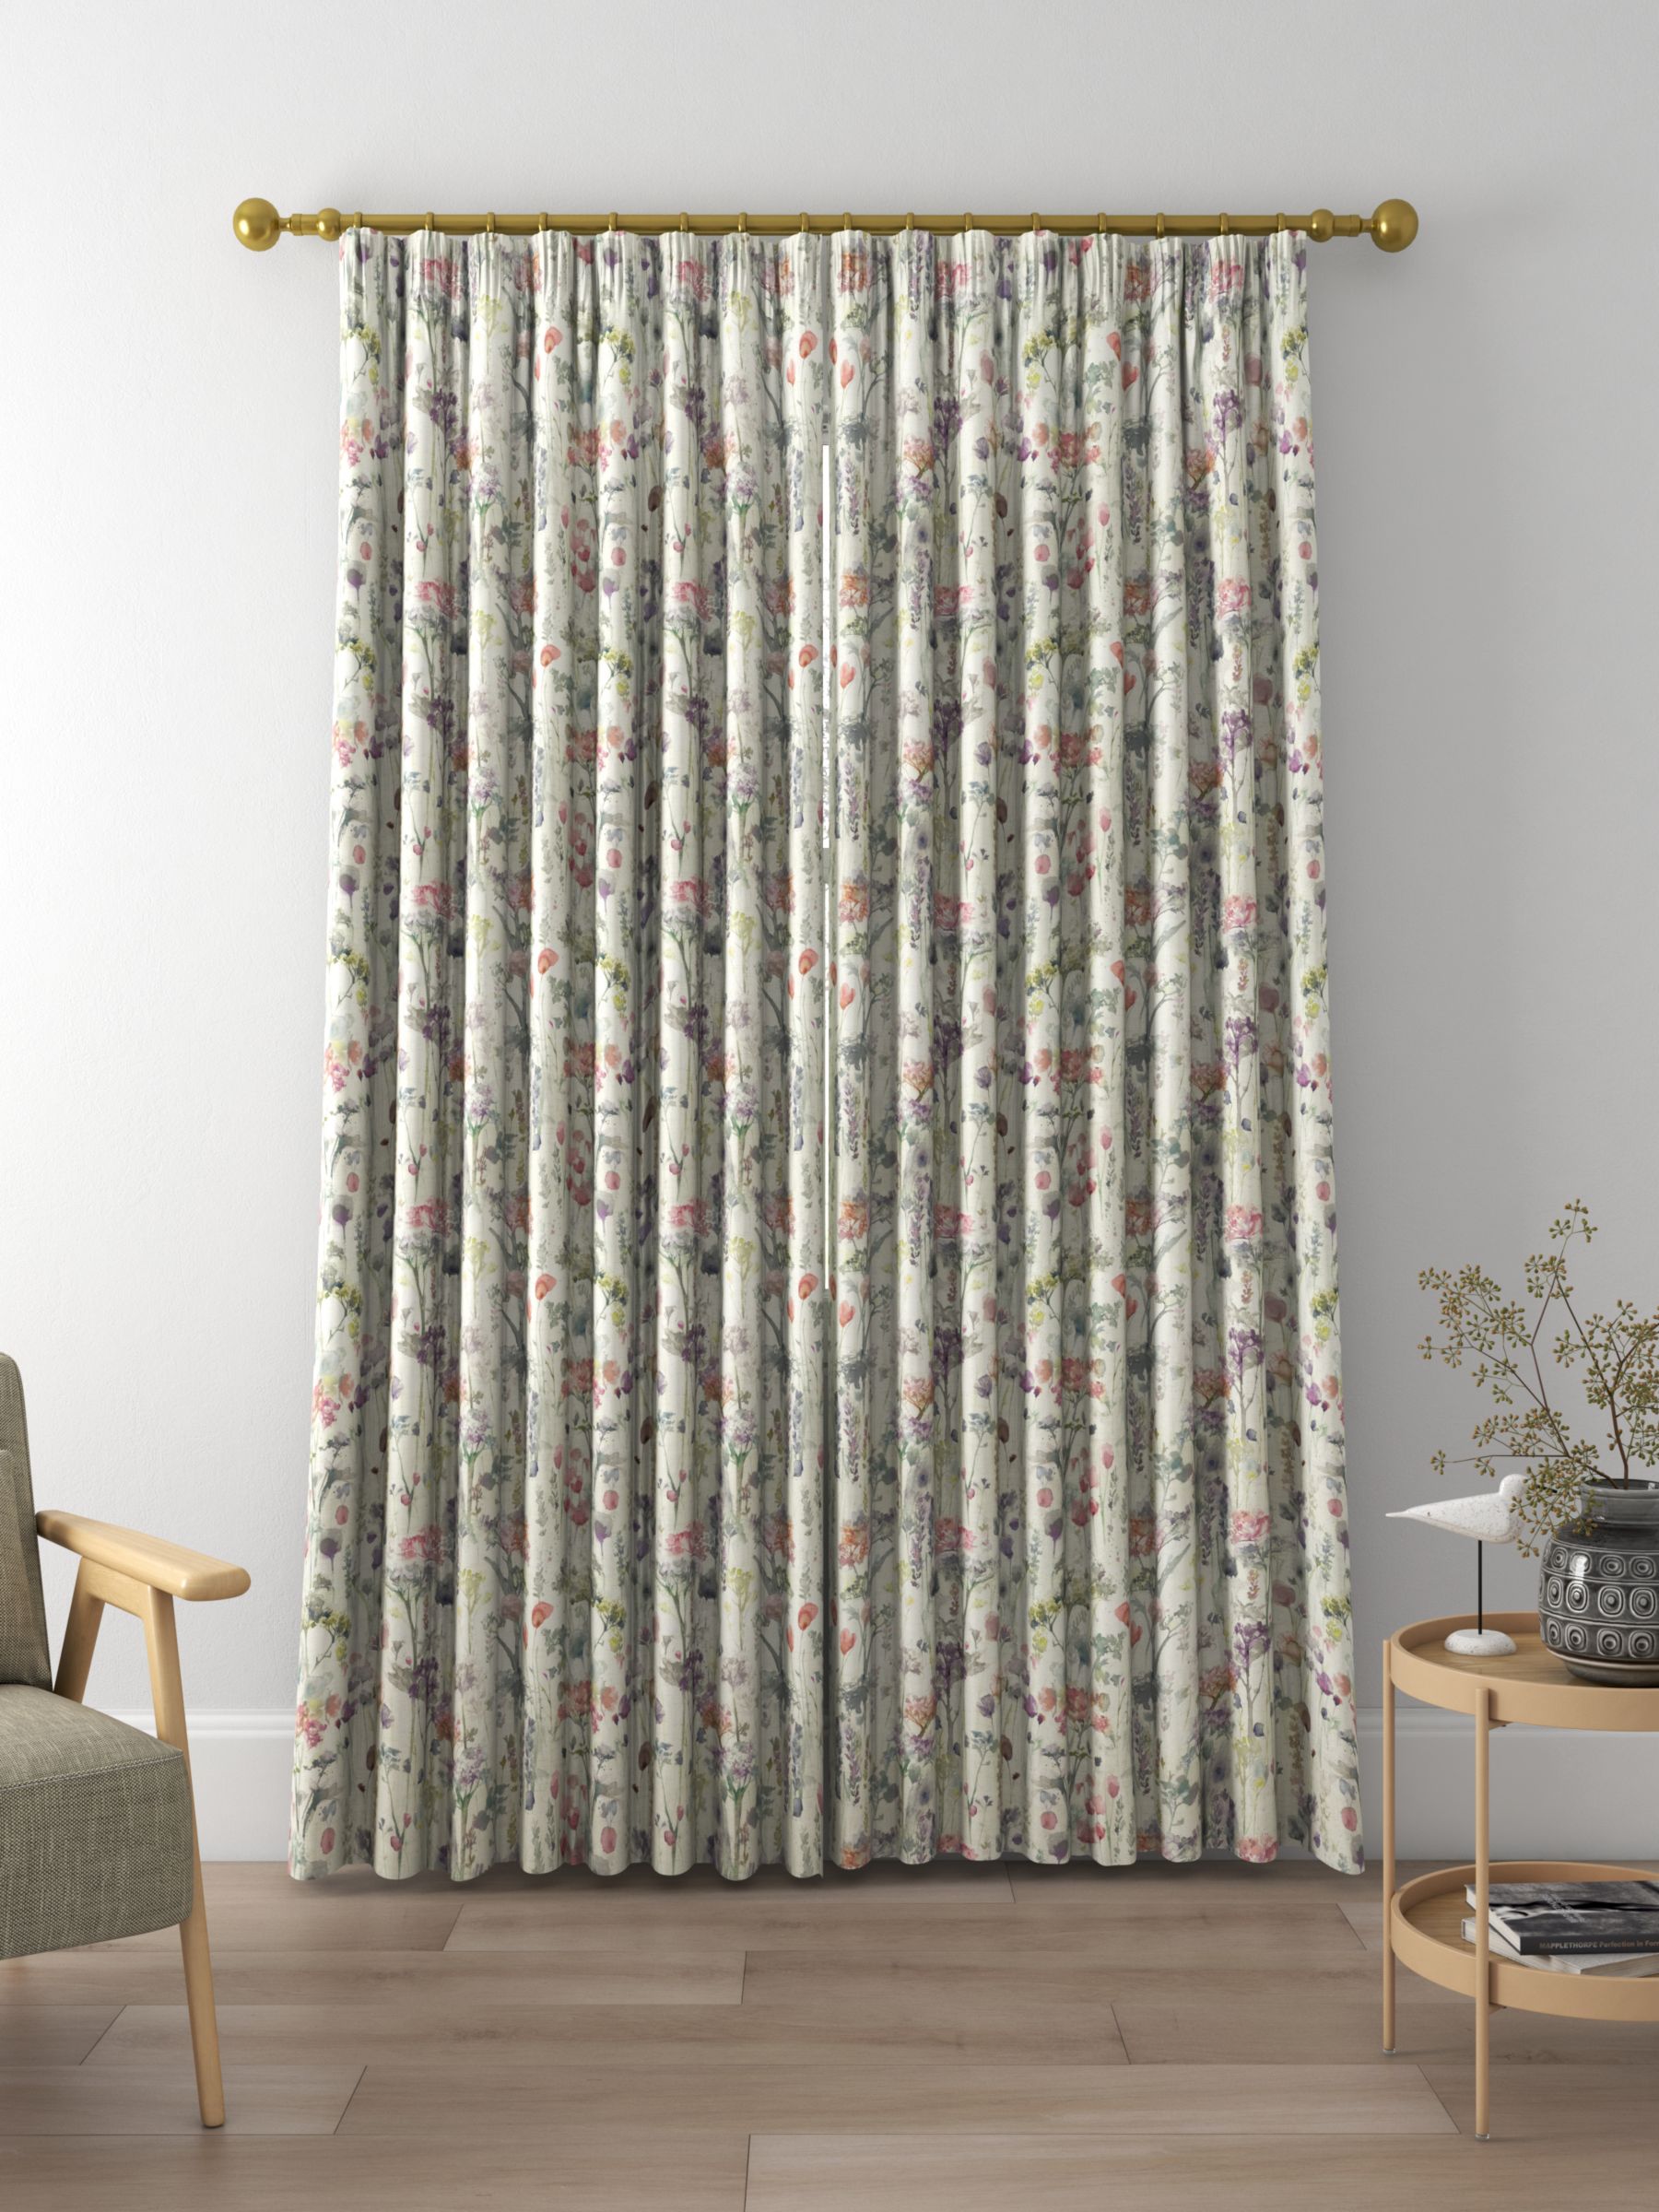 Voyage Ilinzas Made to Measure Curtains, Coral